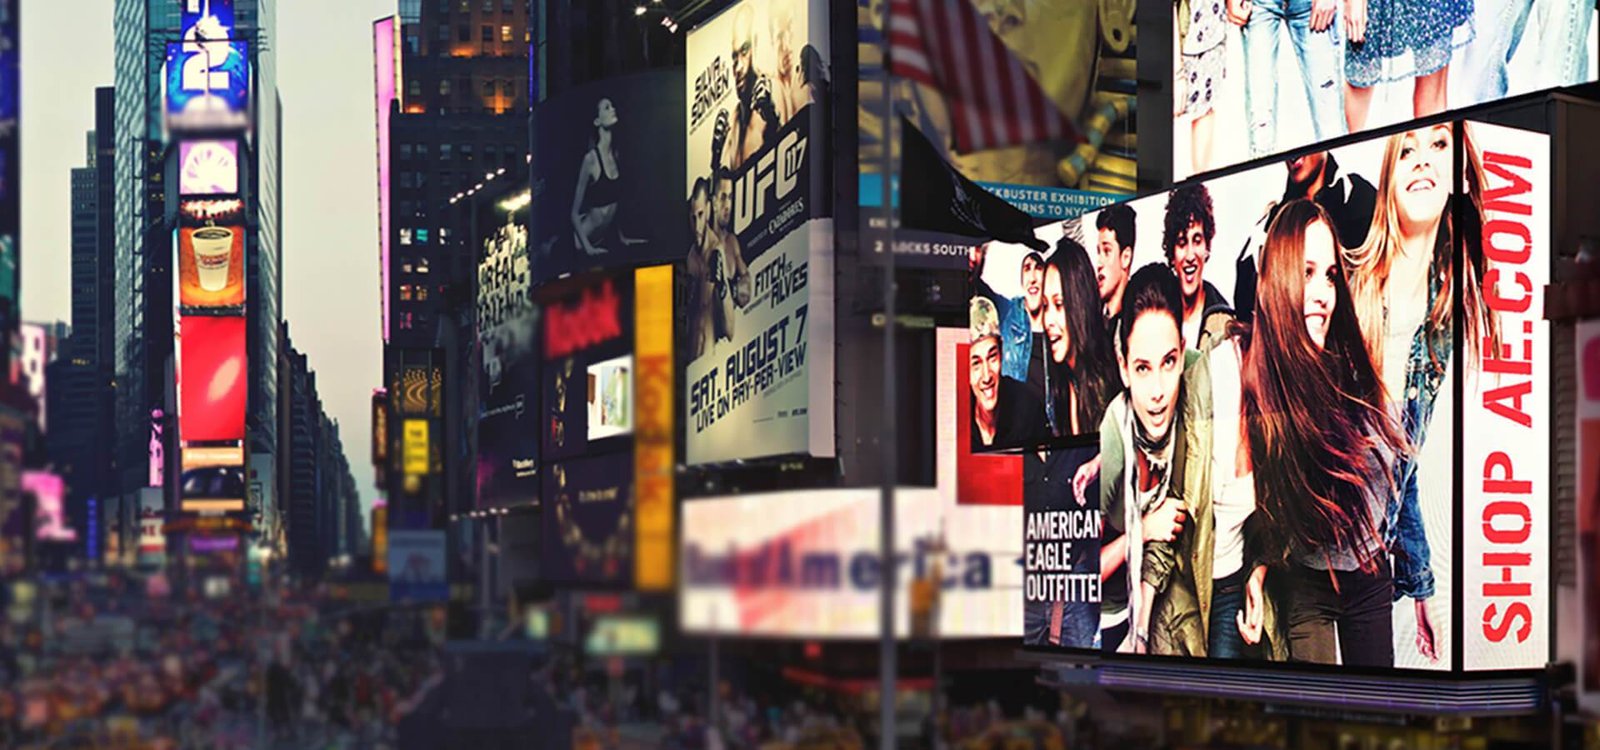 Benefits Of Digital Out-Of-Home (DOOH) Programmatic Advertising